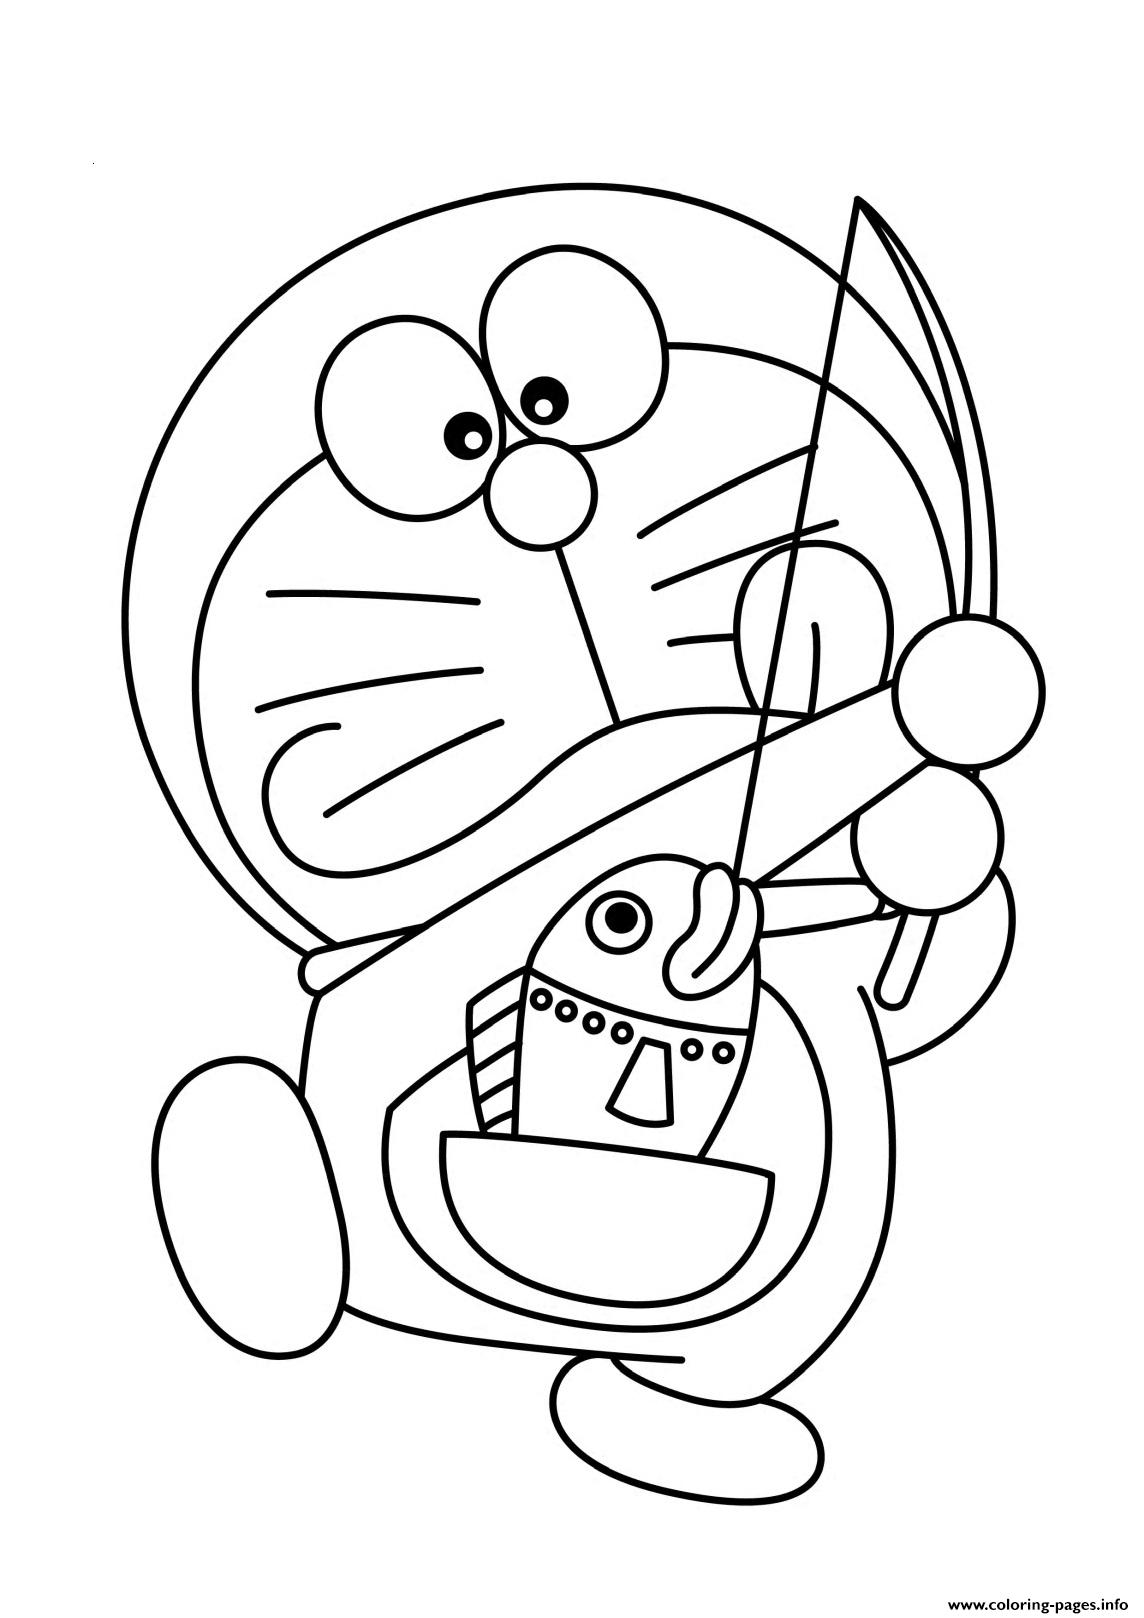 Doraemon Fishing From His Pocket503c Coloring page Printable